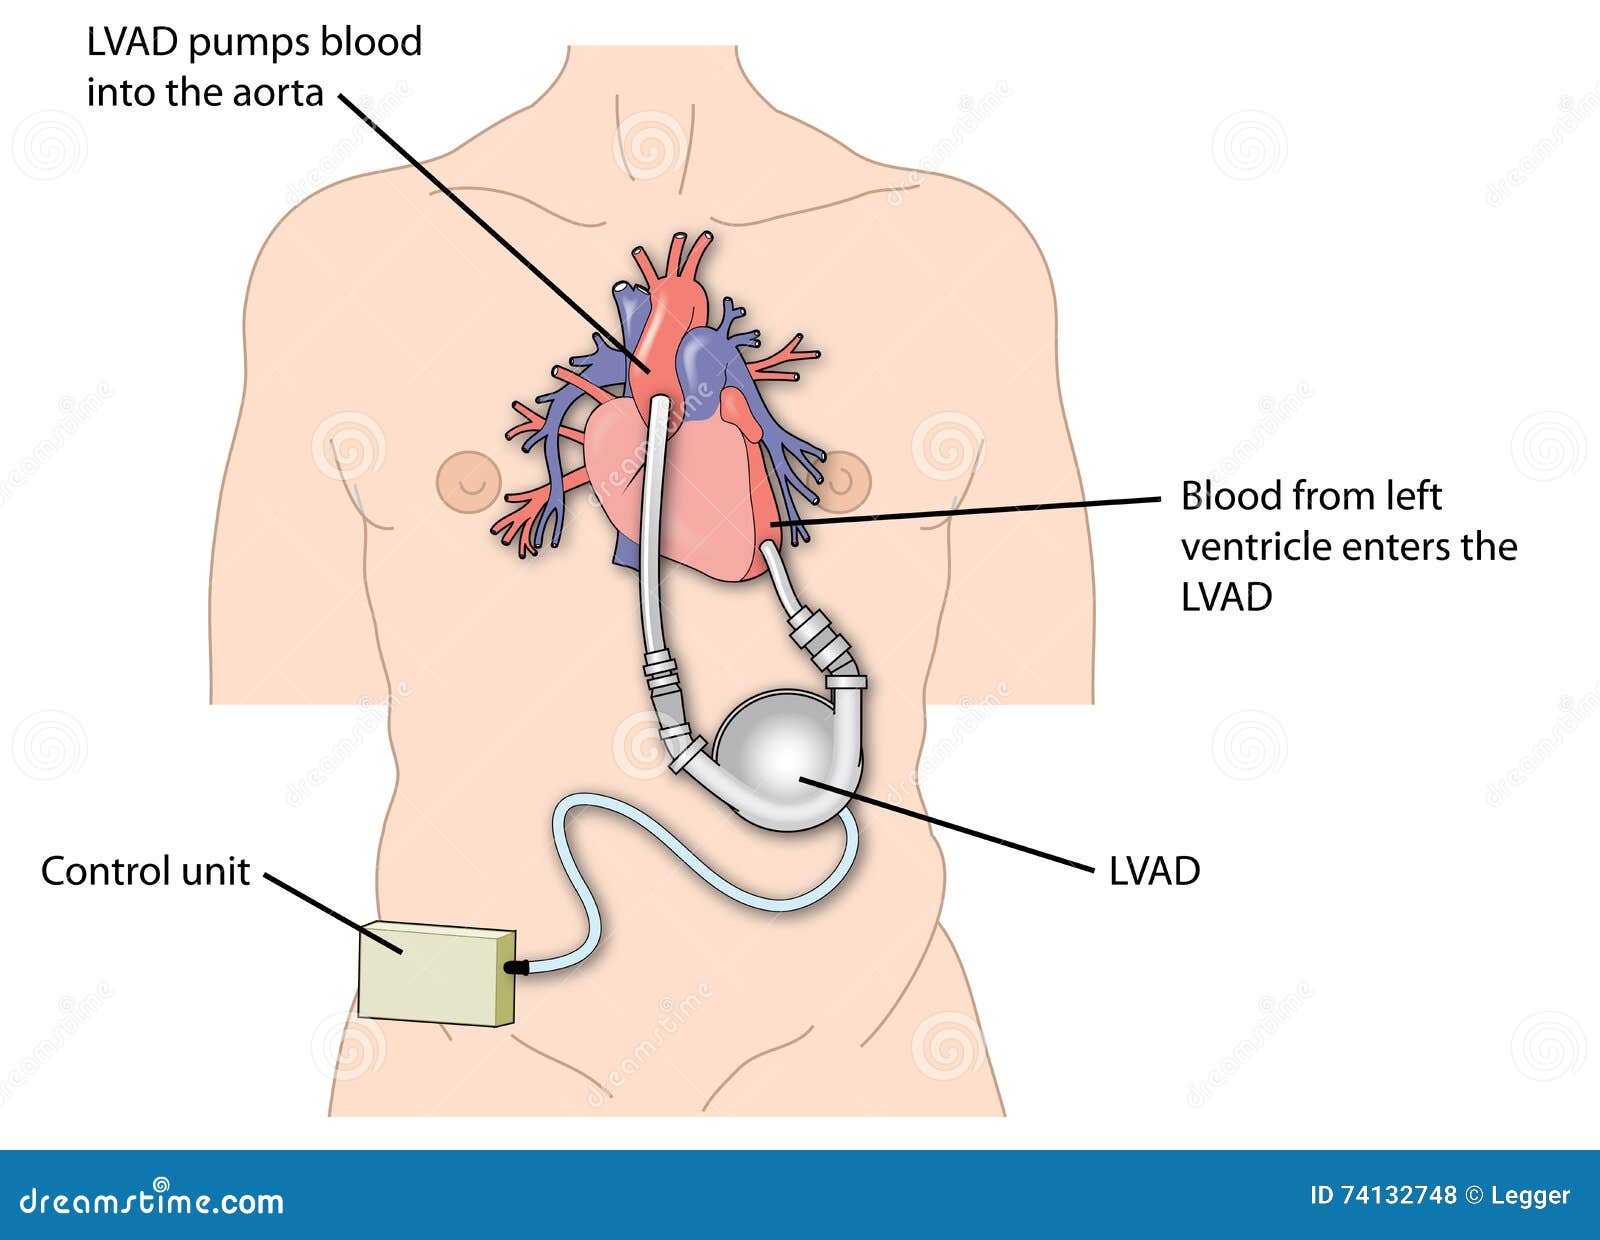 left ventricular assist device (lvad)